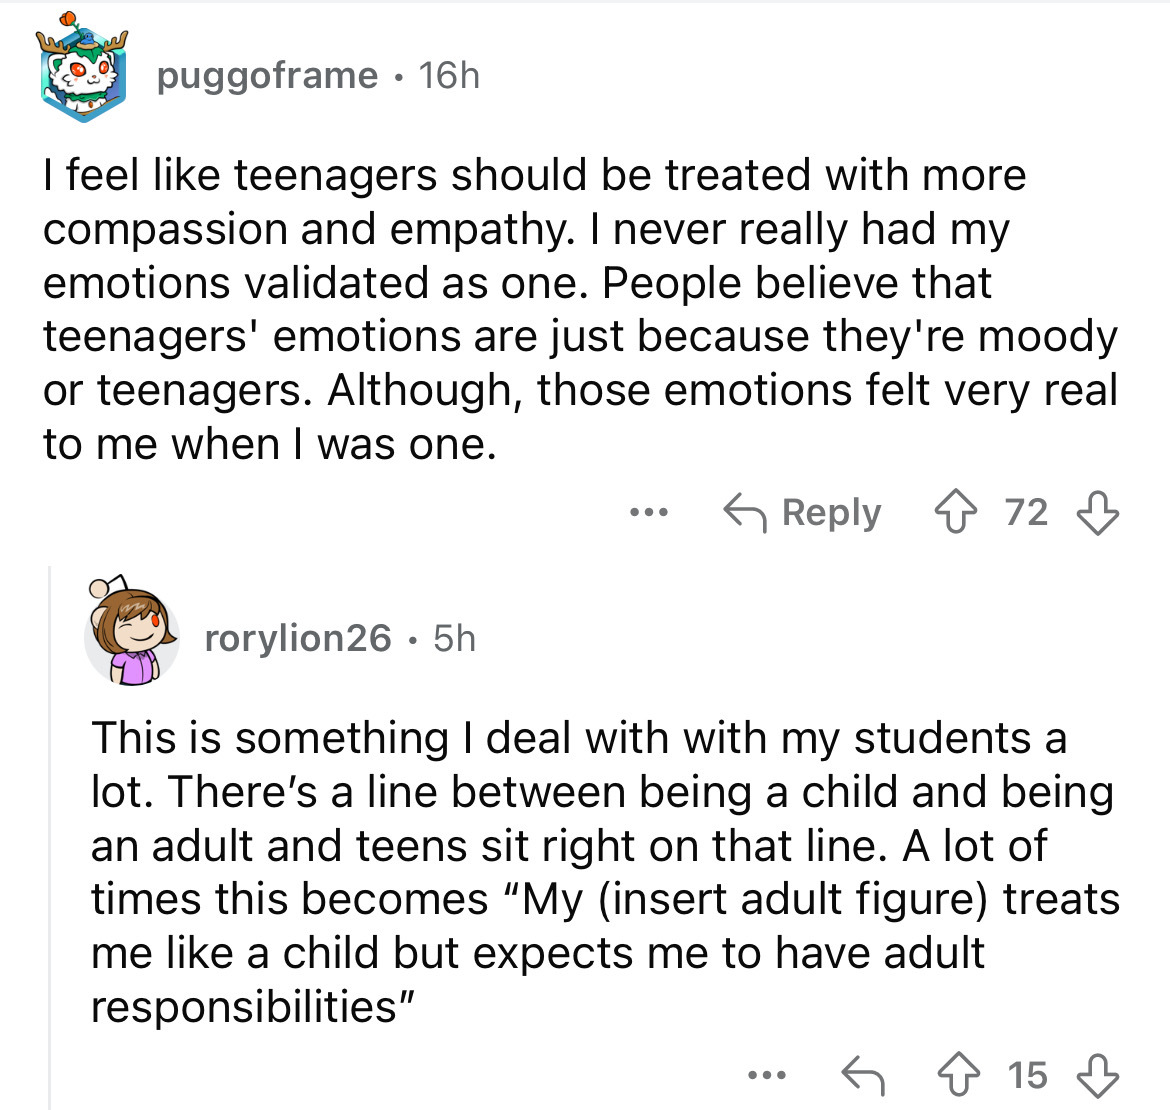 screenshot - puggoframe 16h I feel teenagers should be treated with more compassion and empathy. I never really had my emotions validated as one. People believe that teenagers' emotions are just because they're moody or teenagers. Although, those emotions